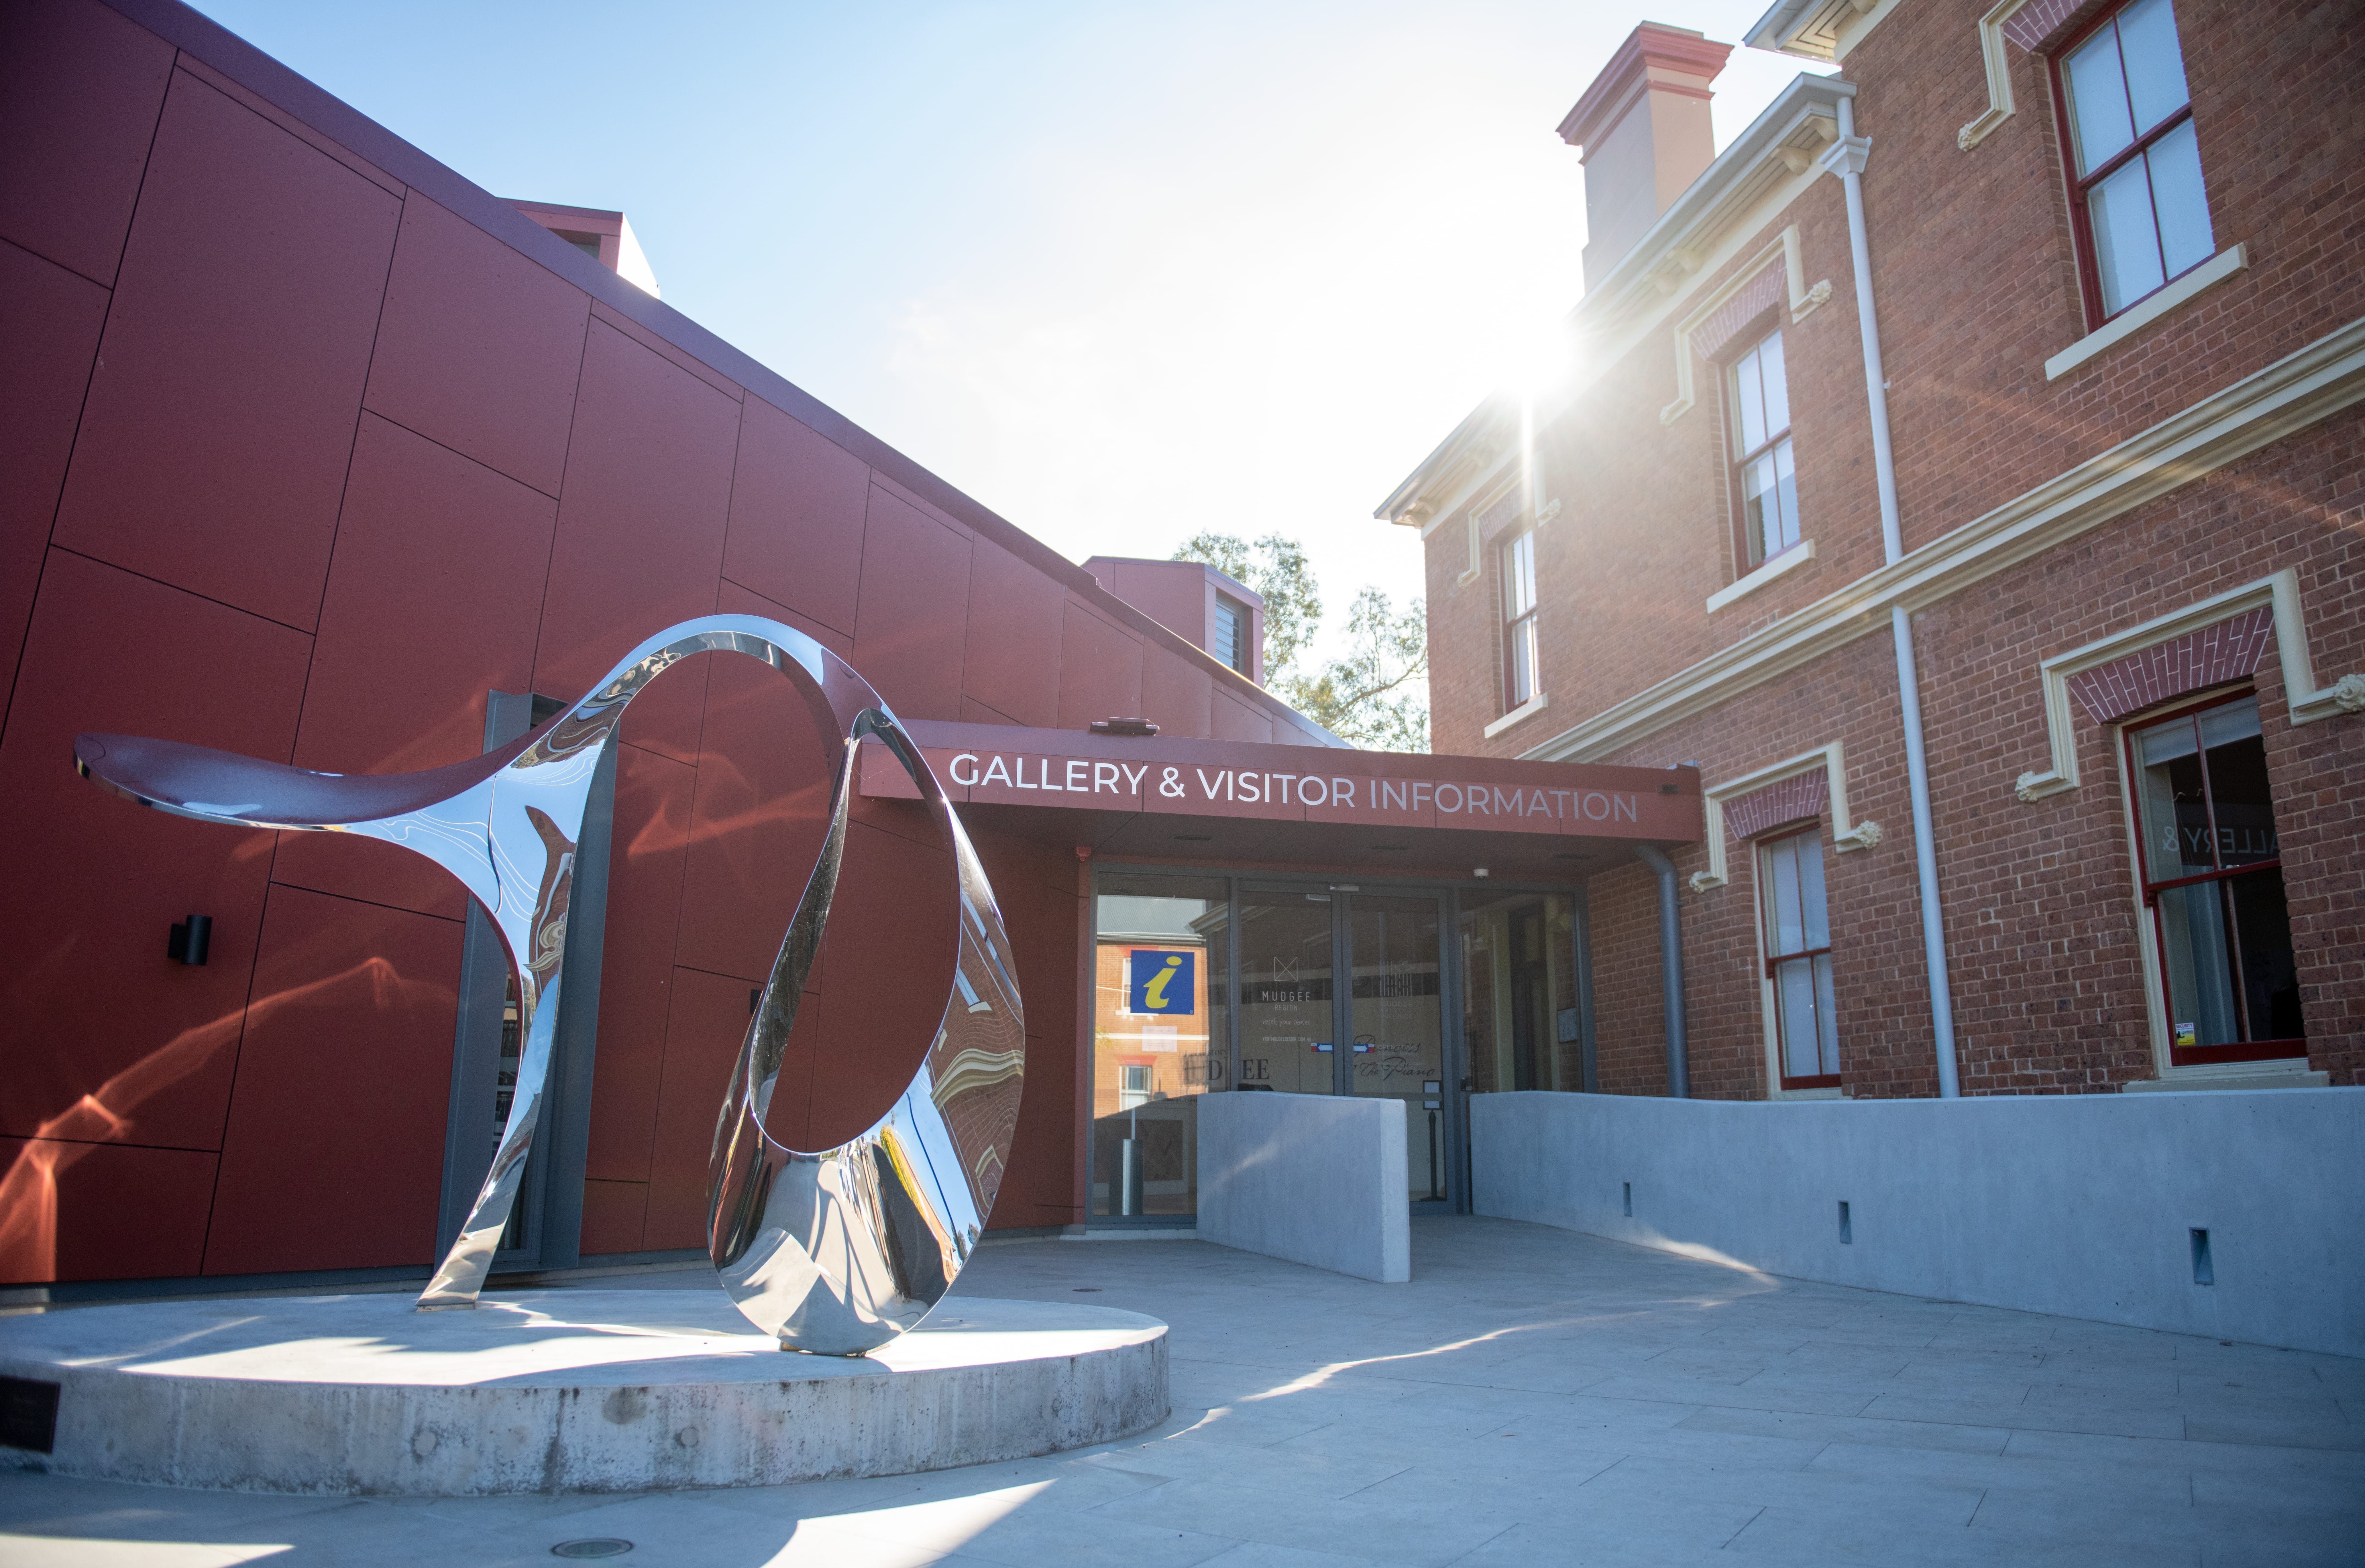 A photo of the entrance to Mudgee Arts Precinct